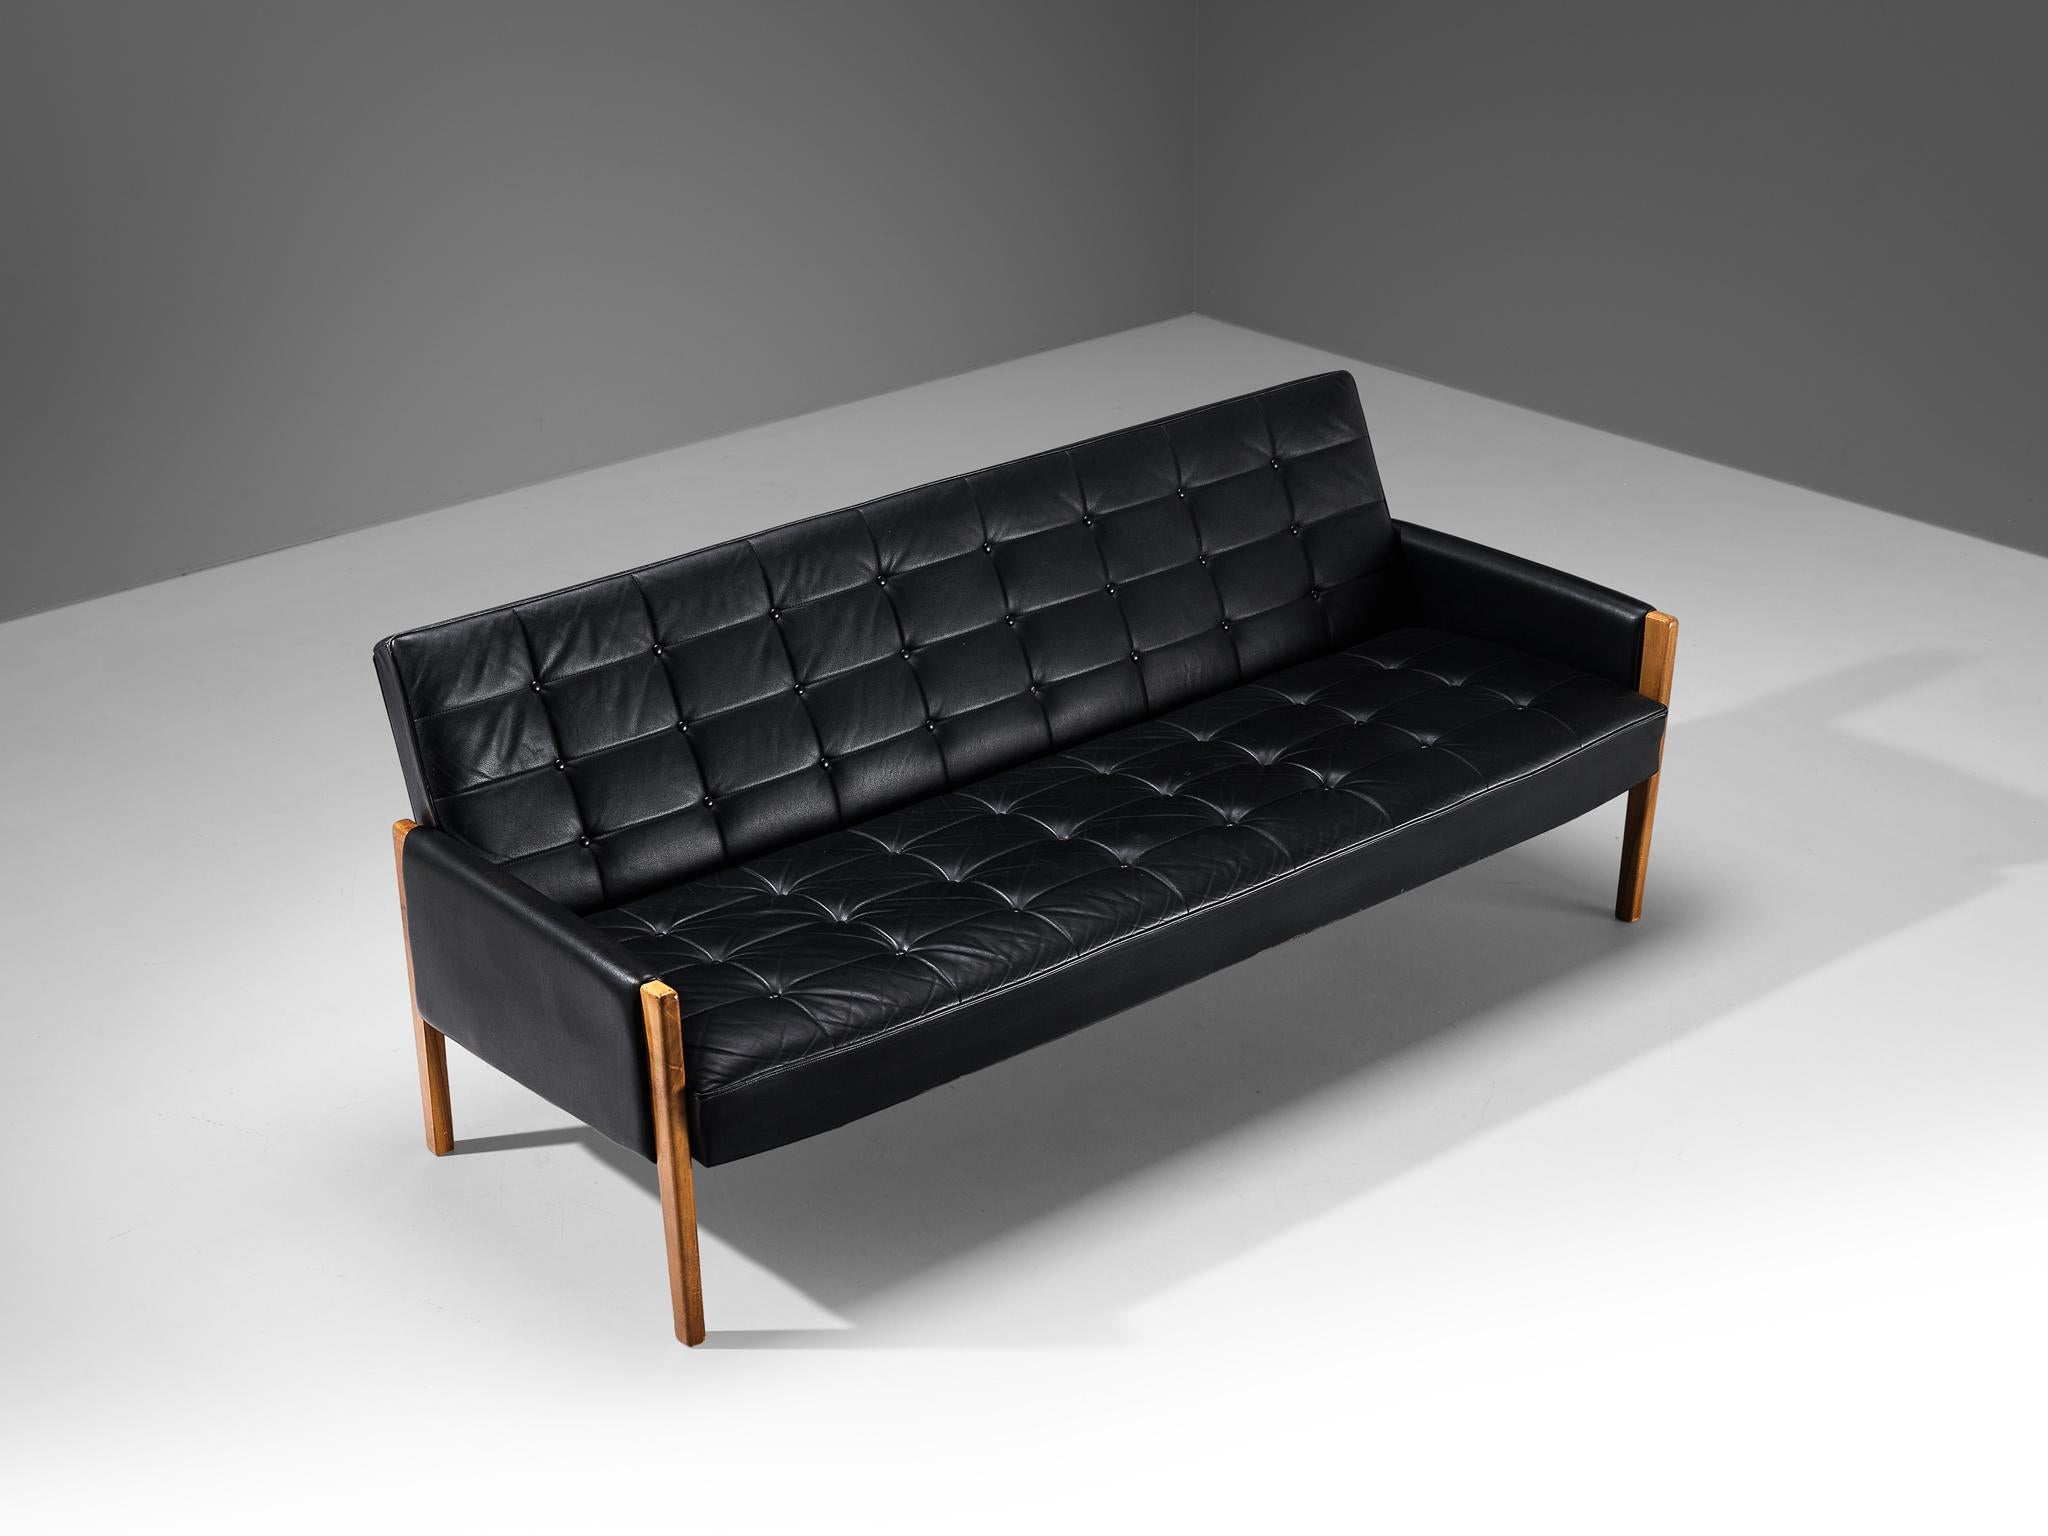 Sofa, leatherette, walnut, Scandinavia, 1960s

This Scandinavian Modern sofa is characterized by a simplistic, natural and timeless aesthetics. The design features a solid construction of clear lines and angular shapes. The most distinctive feature